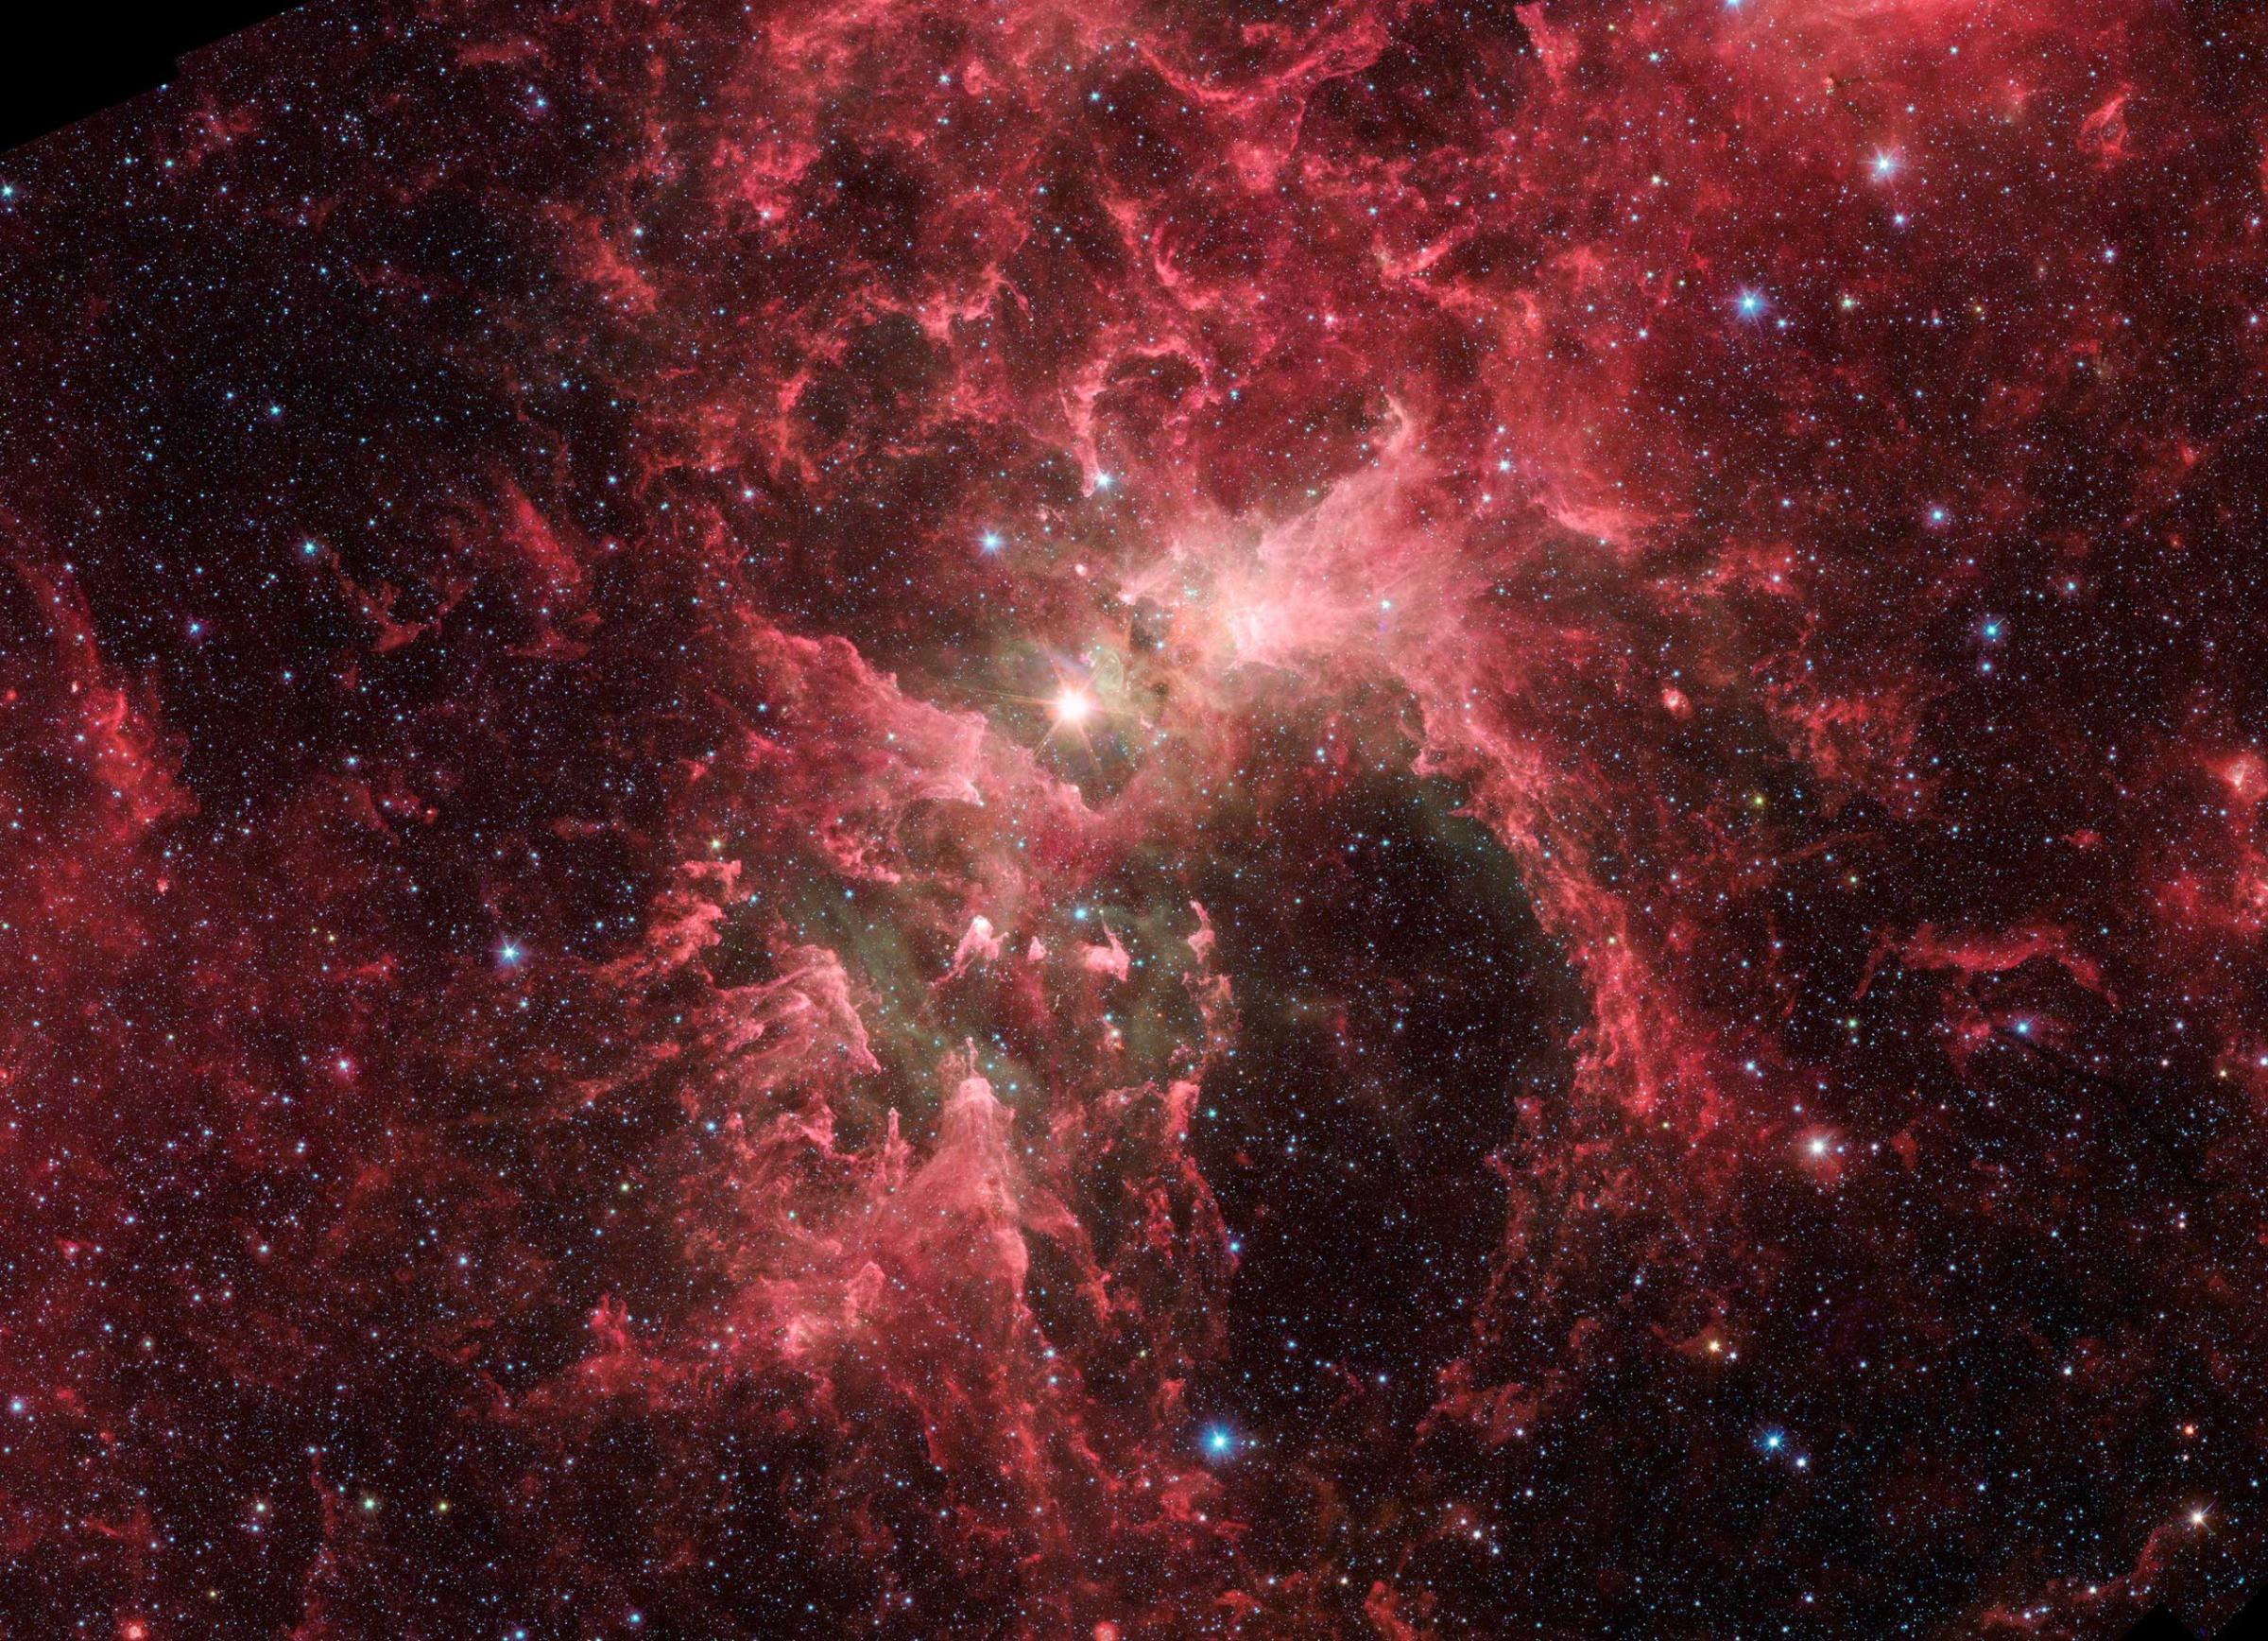 https://www.flickr.com/photos/nasamarshall/15050207206/Eta Carinae: Our Neighboring Superstars (NASA, Chandra, 08/26/14)Eta Carinae is one of the most luminous known star systems in our galaxy. It radiates energy at a rate that is 5 million times that of the Sun. Most of this energy is radiated at infrared wavelengths. It is shrouded in a rapidly expanding cloud of dust which absorbs radiation from the central star and re-radiates it in the infrared.